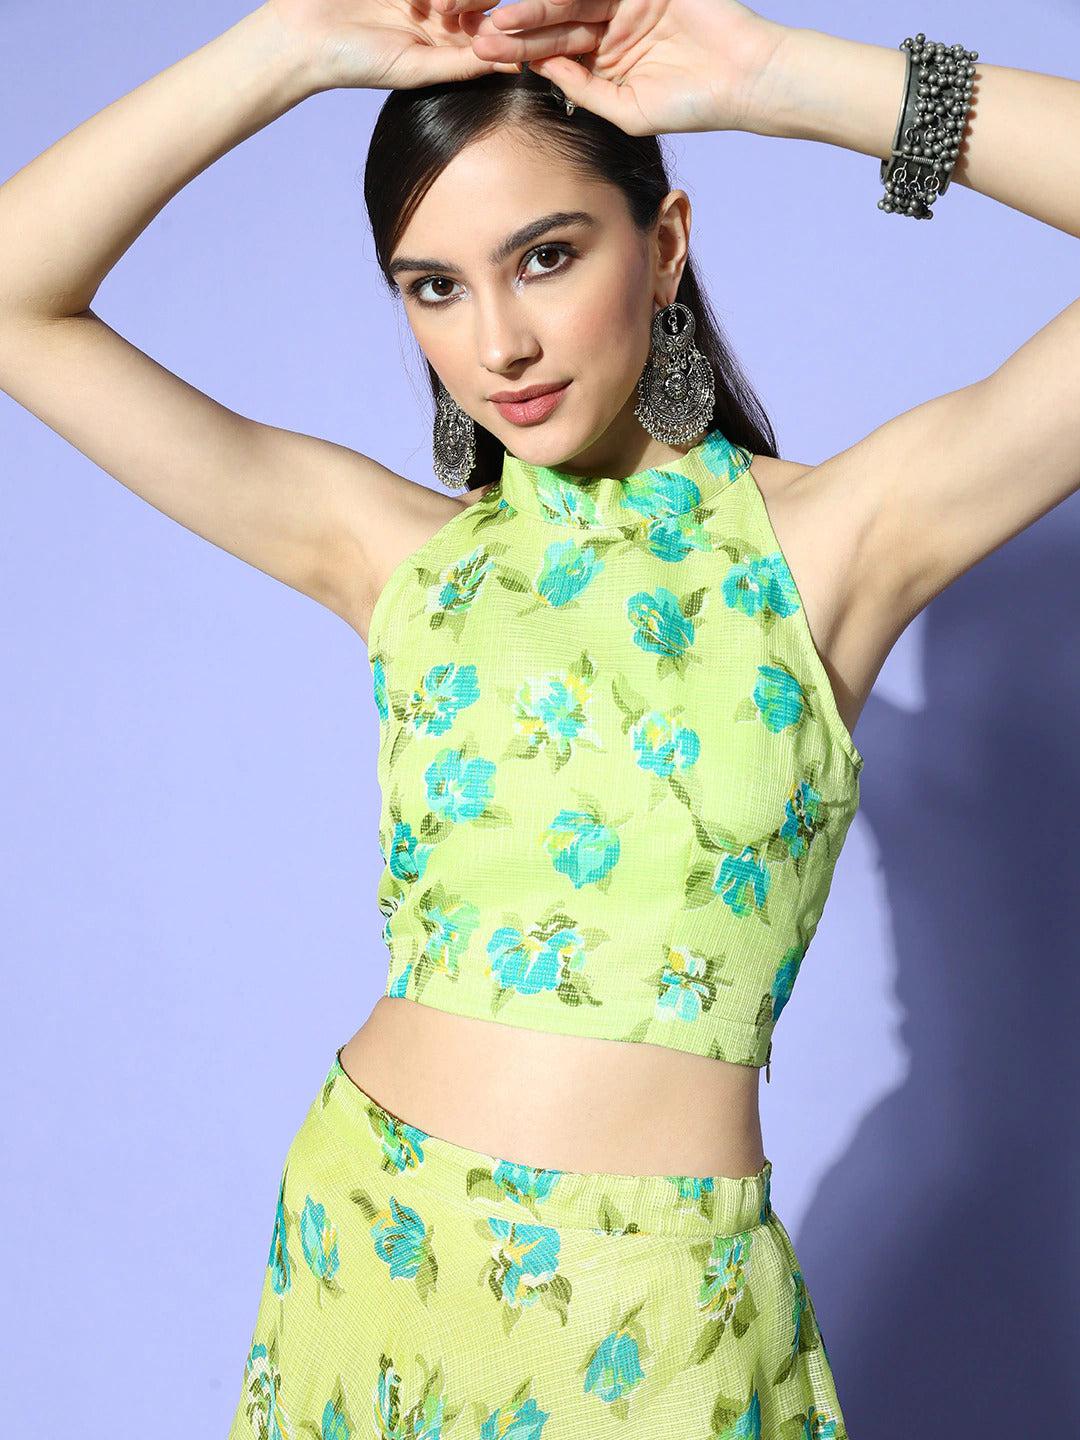 Printed Crop Top With Skirt